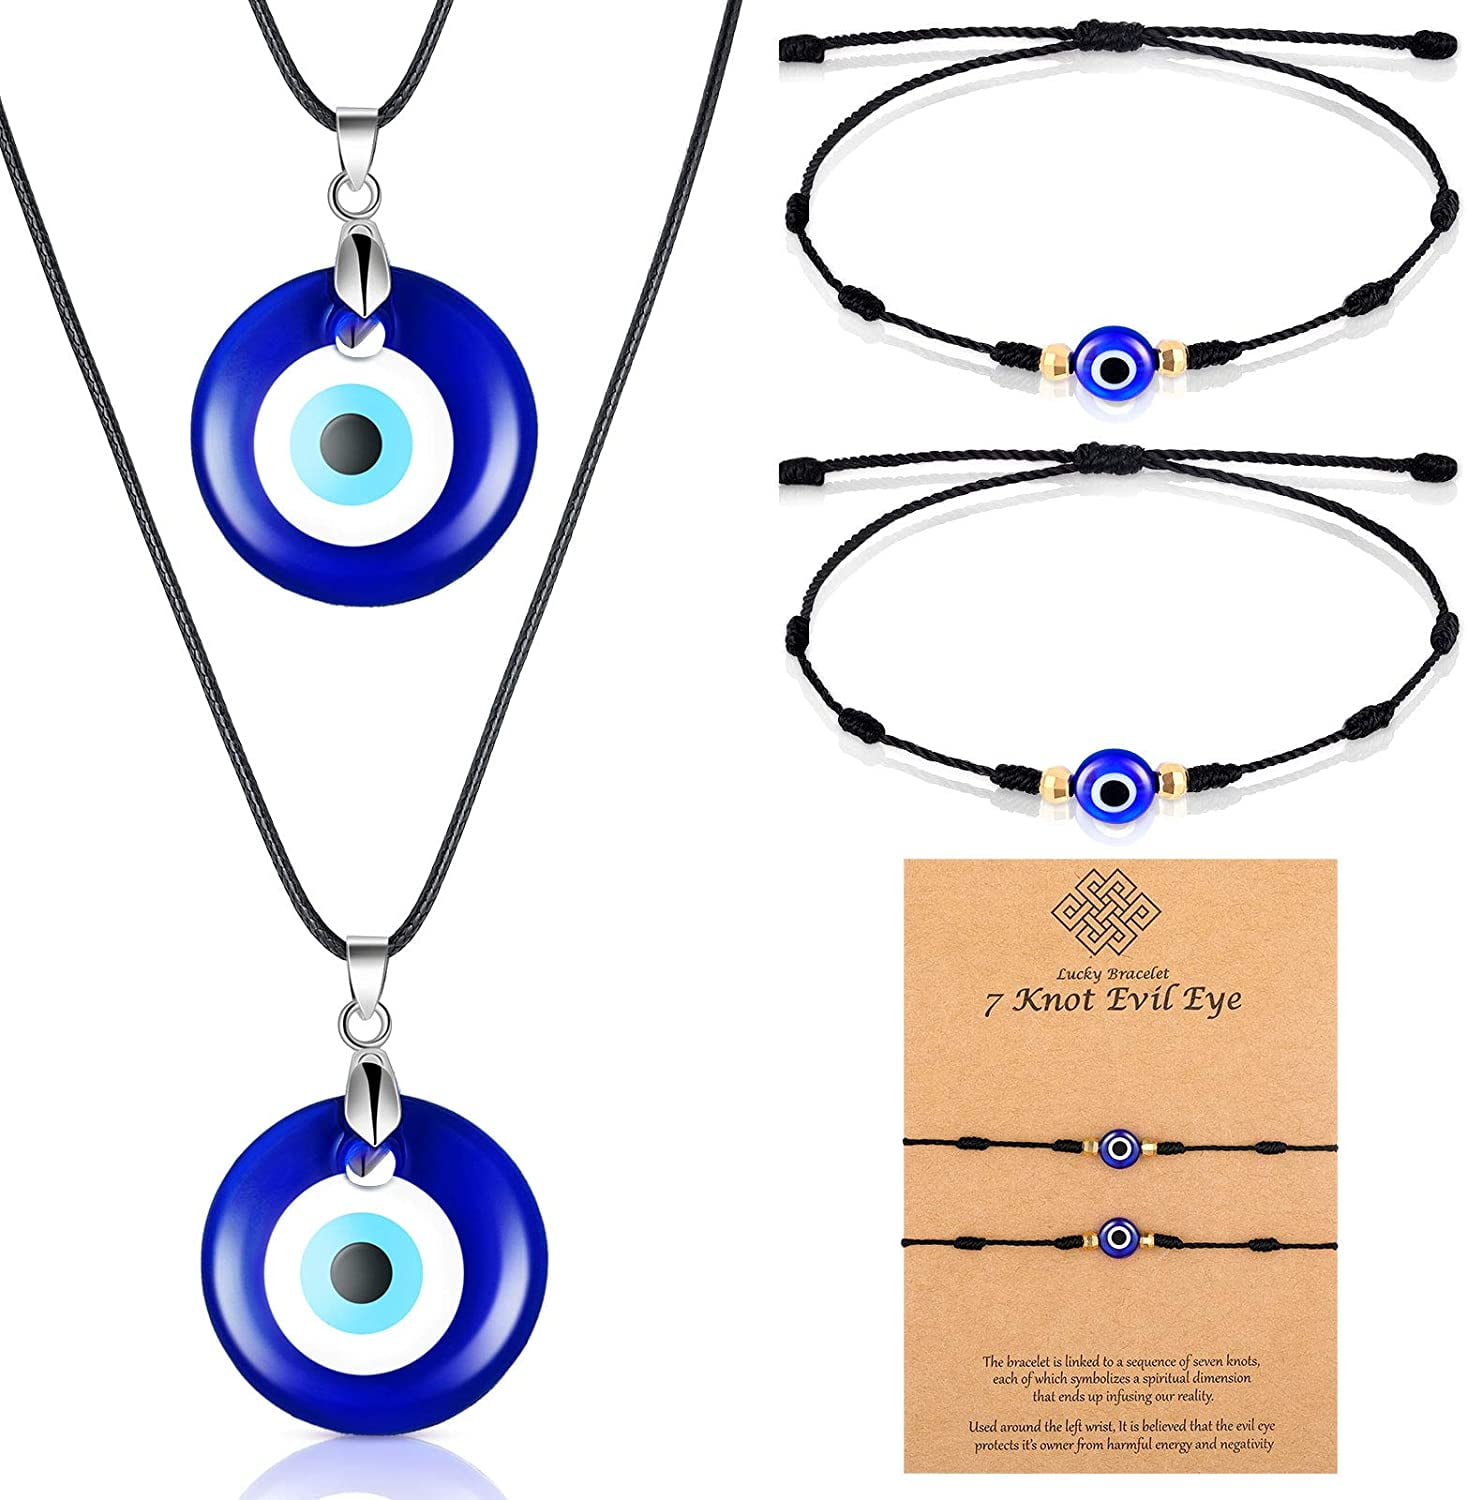 What is The Evil Eye?